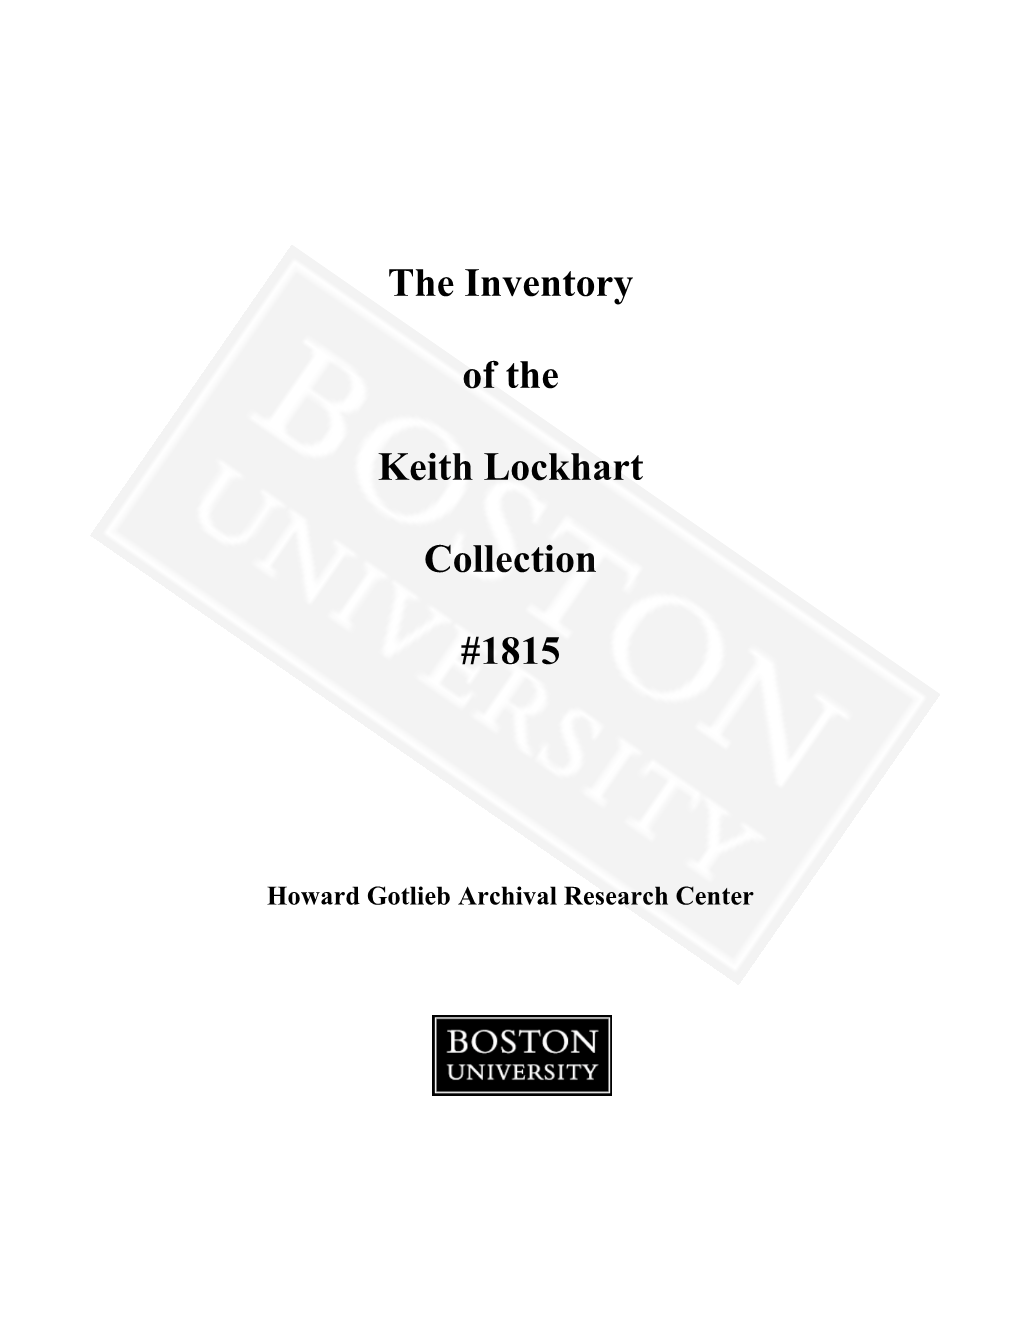 The Inventory of the Keith Lockhart Collection #1815